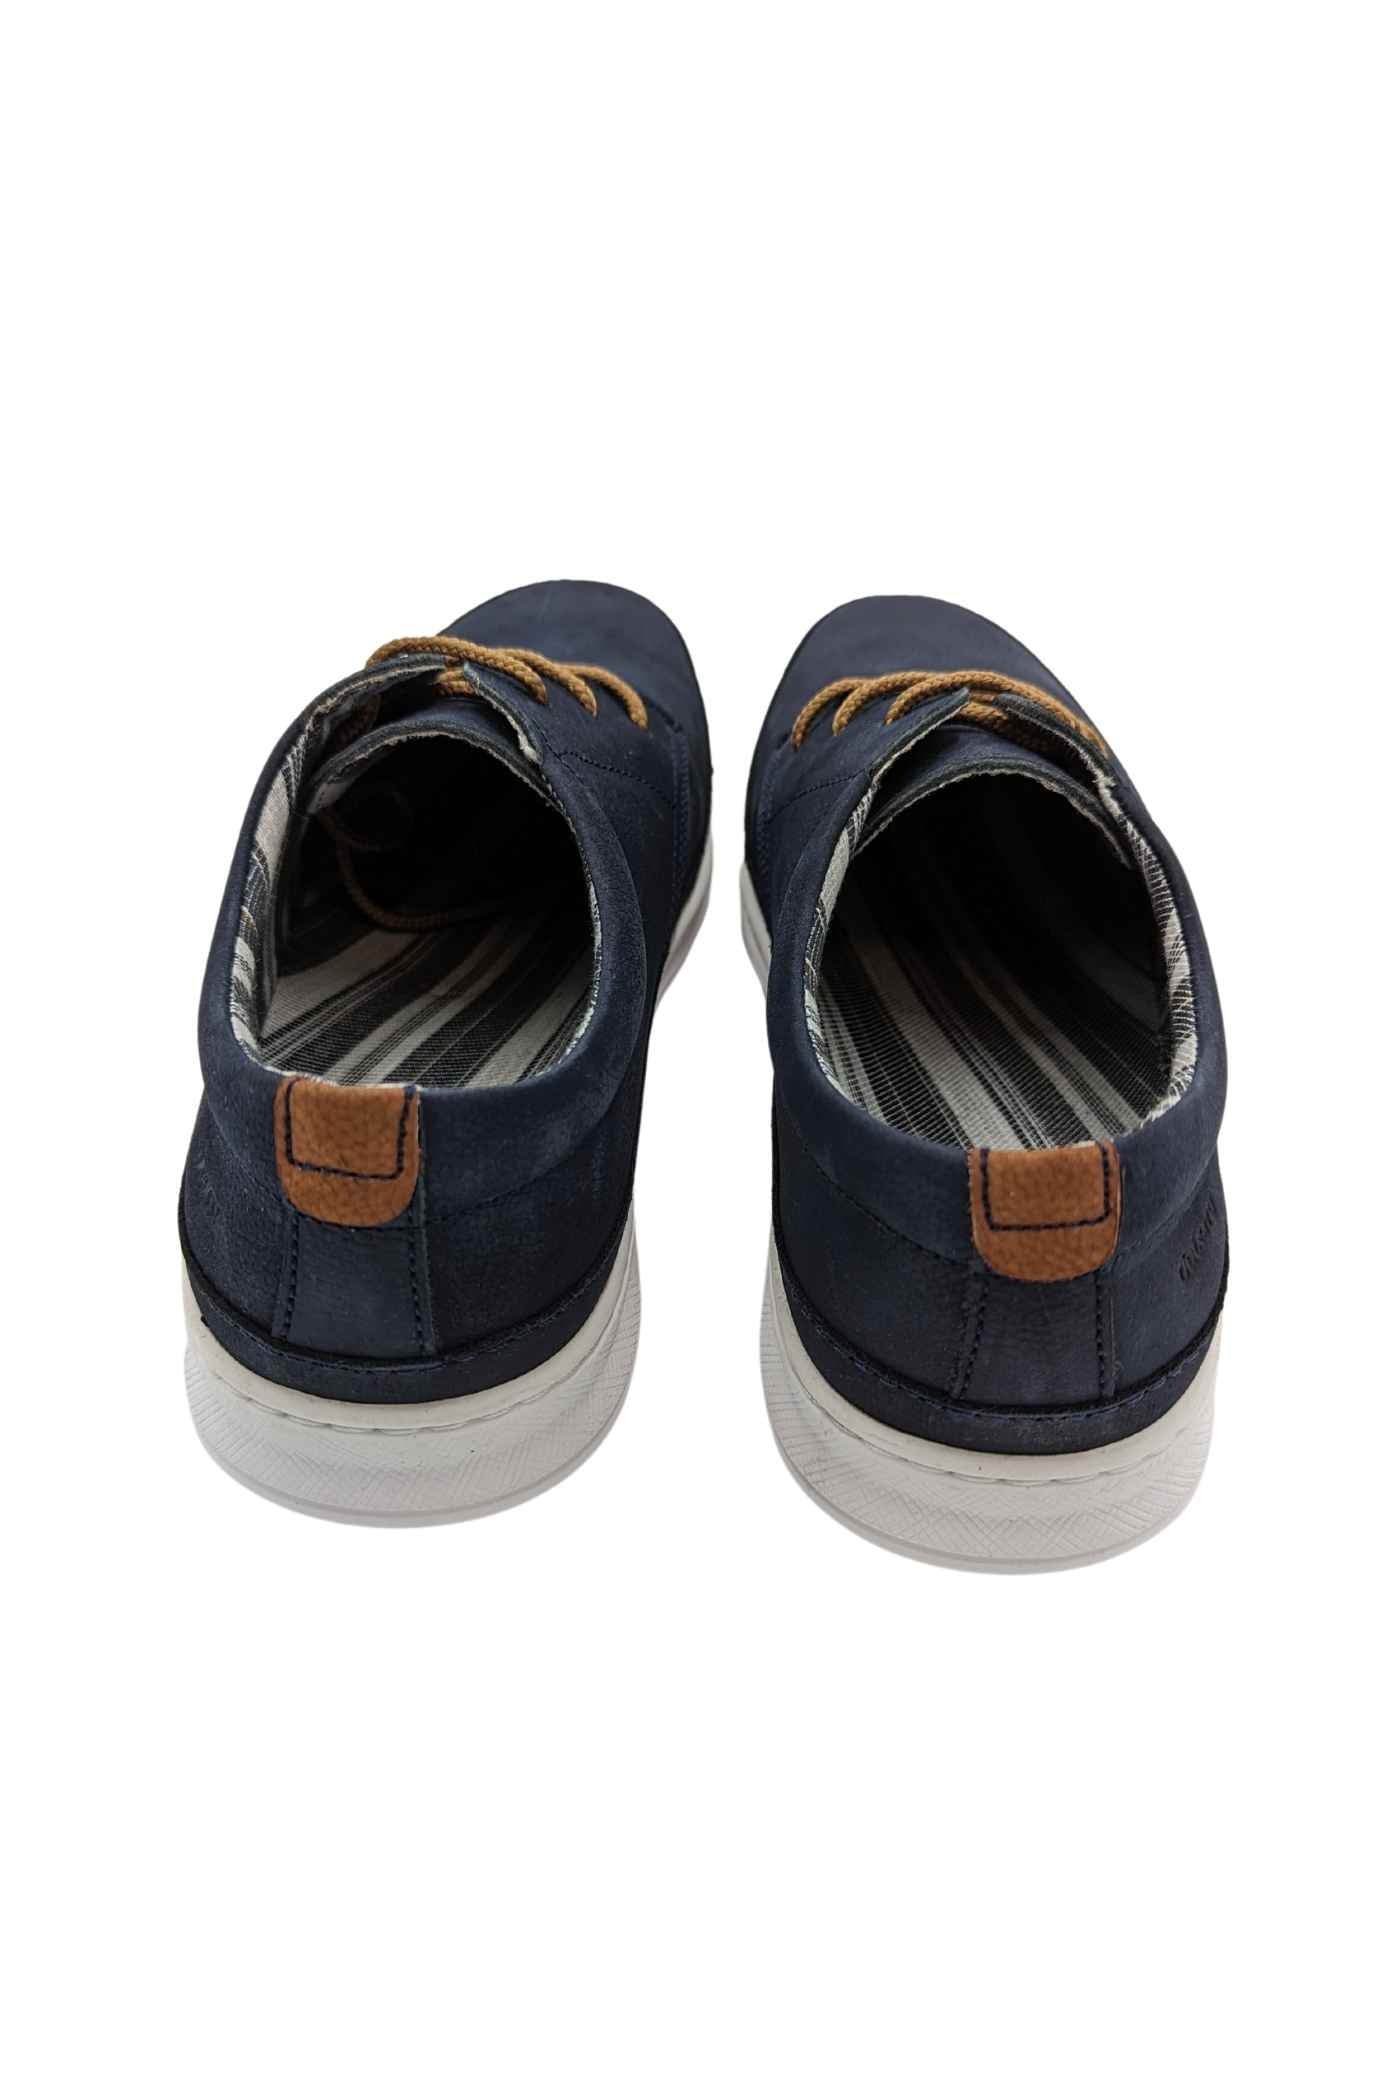 Sully Navy Shoe-Heel view